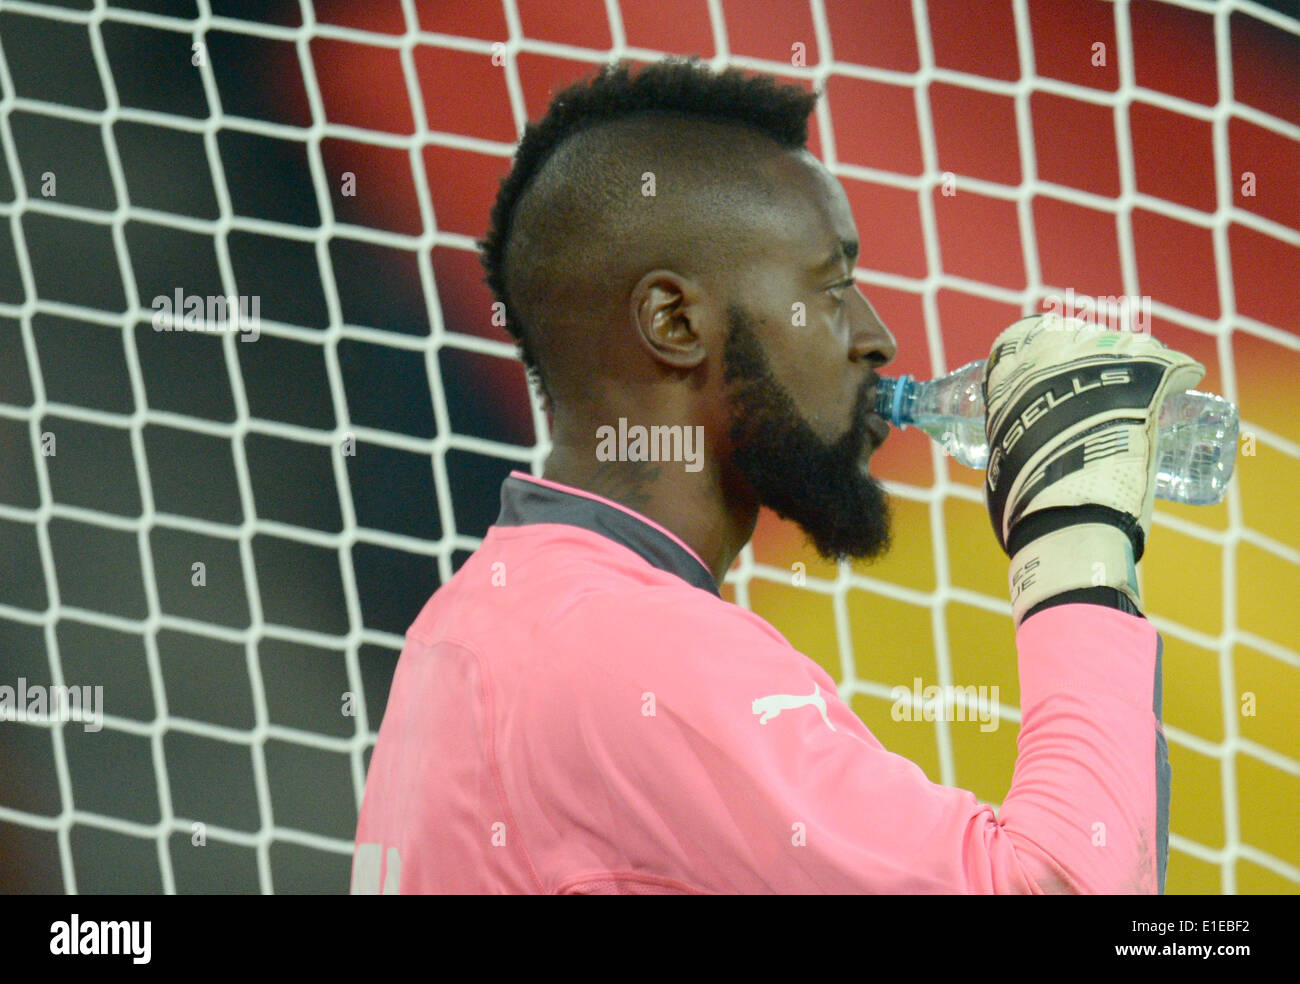 Moenchengladbach, Germany. 01st June, 2014. Cameroon's goalkeeper Charles Itandje drinks during the friendly soccer match between Germany and Cameroon at the Borussia Park stadium in Moenchengladbach, Germany, 01 June 2014. Photo: Bernd Thissen/dpa/Alamy Live News Stock Photo